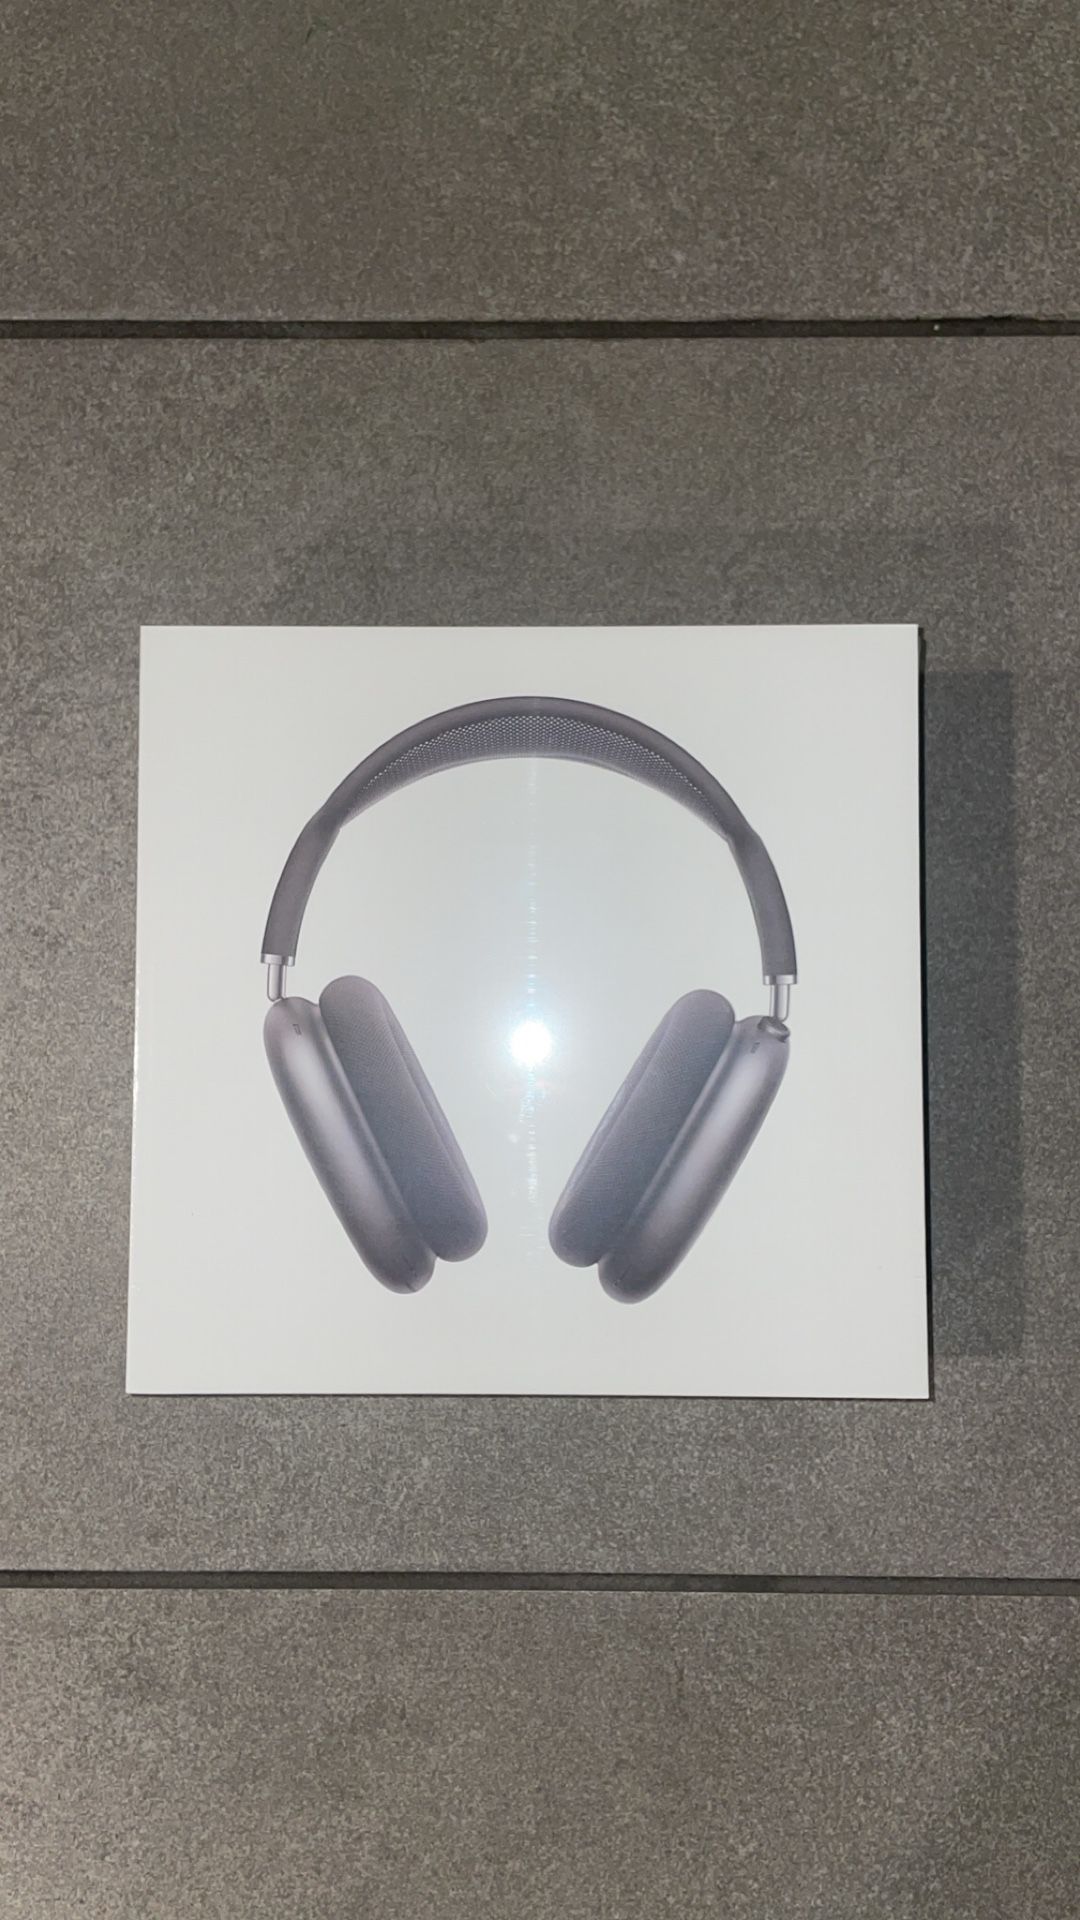 Airpods Max -Space Grey- Sealed And Ready To Ship